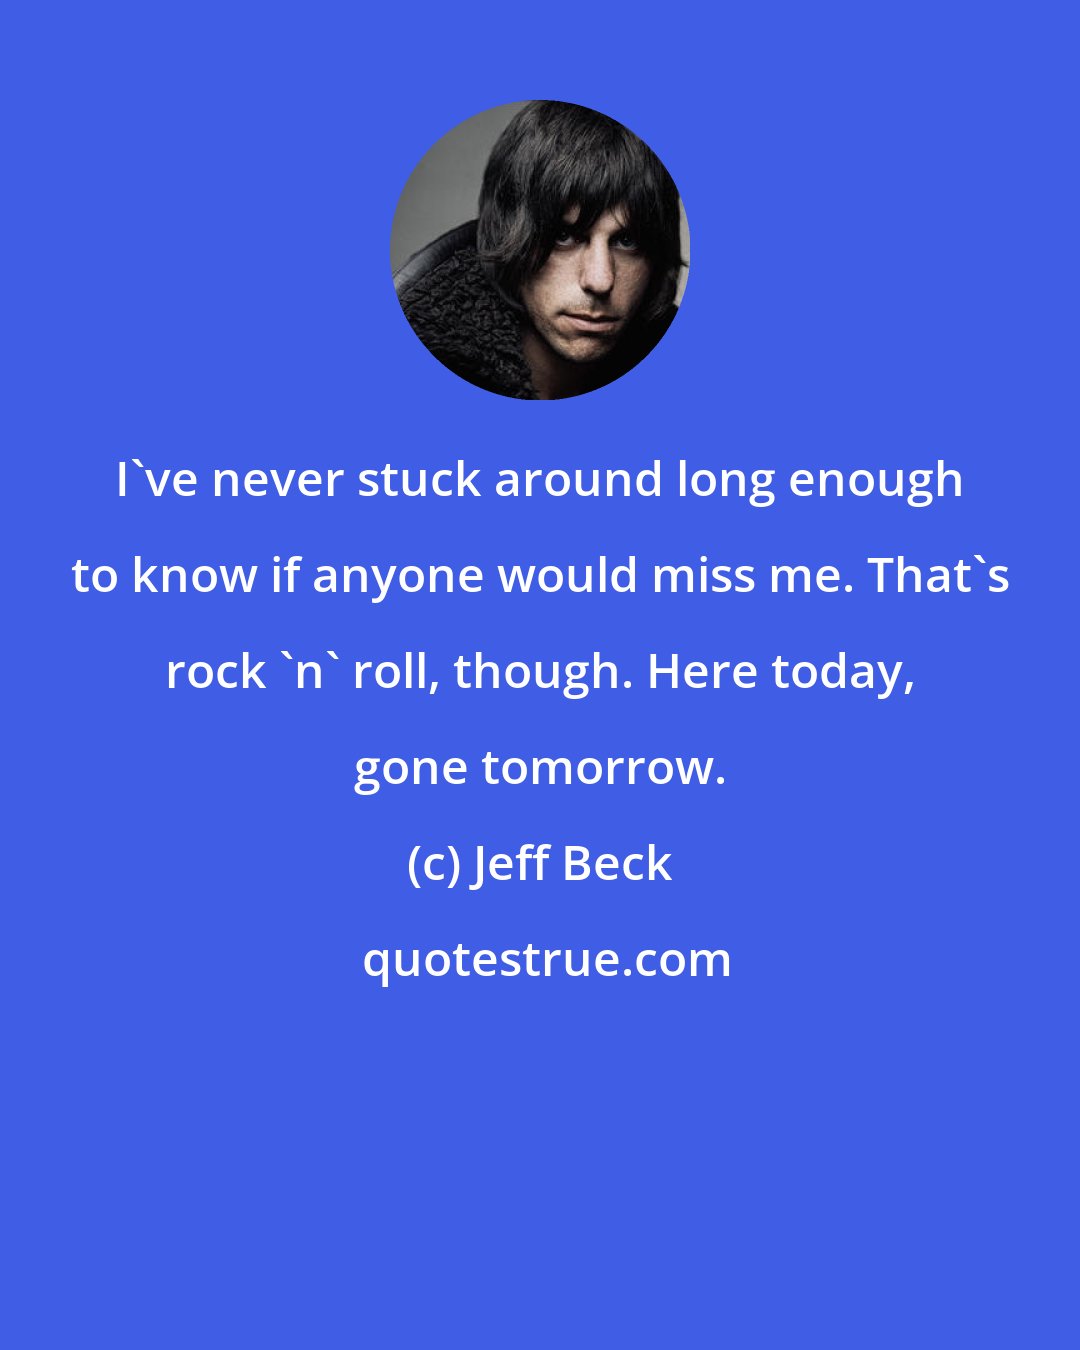 Jeff Beck: I've never stuck around long enough to know if anyone would miss me. That's rock 'n' roll, though. Here today, gone tomorrow.